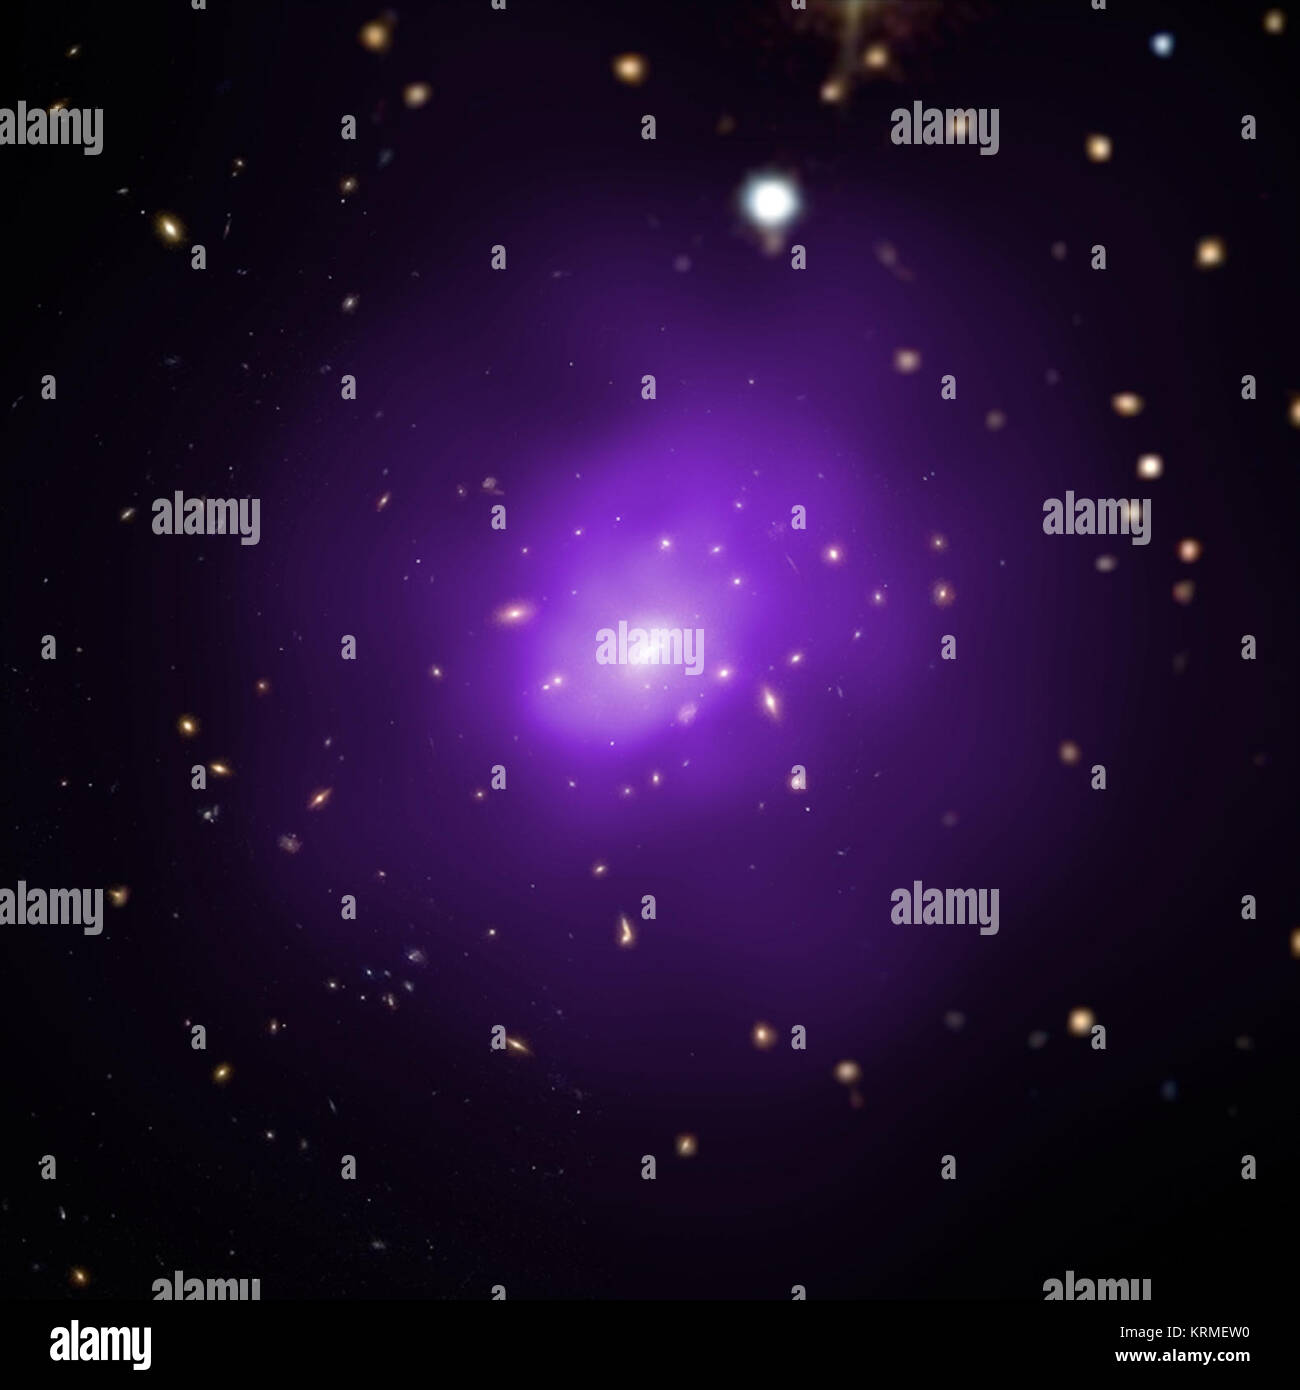 These four galaxy clusters were part of a large survey of over 300 clusters used to investigate dark energy, the mysterious energy that is currently driving the accelerating expansion of the Universe. In these composite images, X-rays from Chandra (purple) have been combined with optical light from Hubble and Sloan Digital Sky Survey (red, green, and blue). Researchers used a novel technique that takes advantage of the observation that the outer reaches of galaxy clusters, the largest structures in the universe held together by gravity, show similarity in their X-ray emission profiles and size Stock Photo